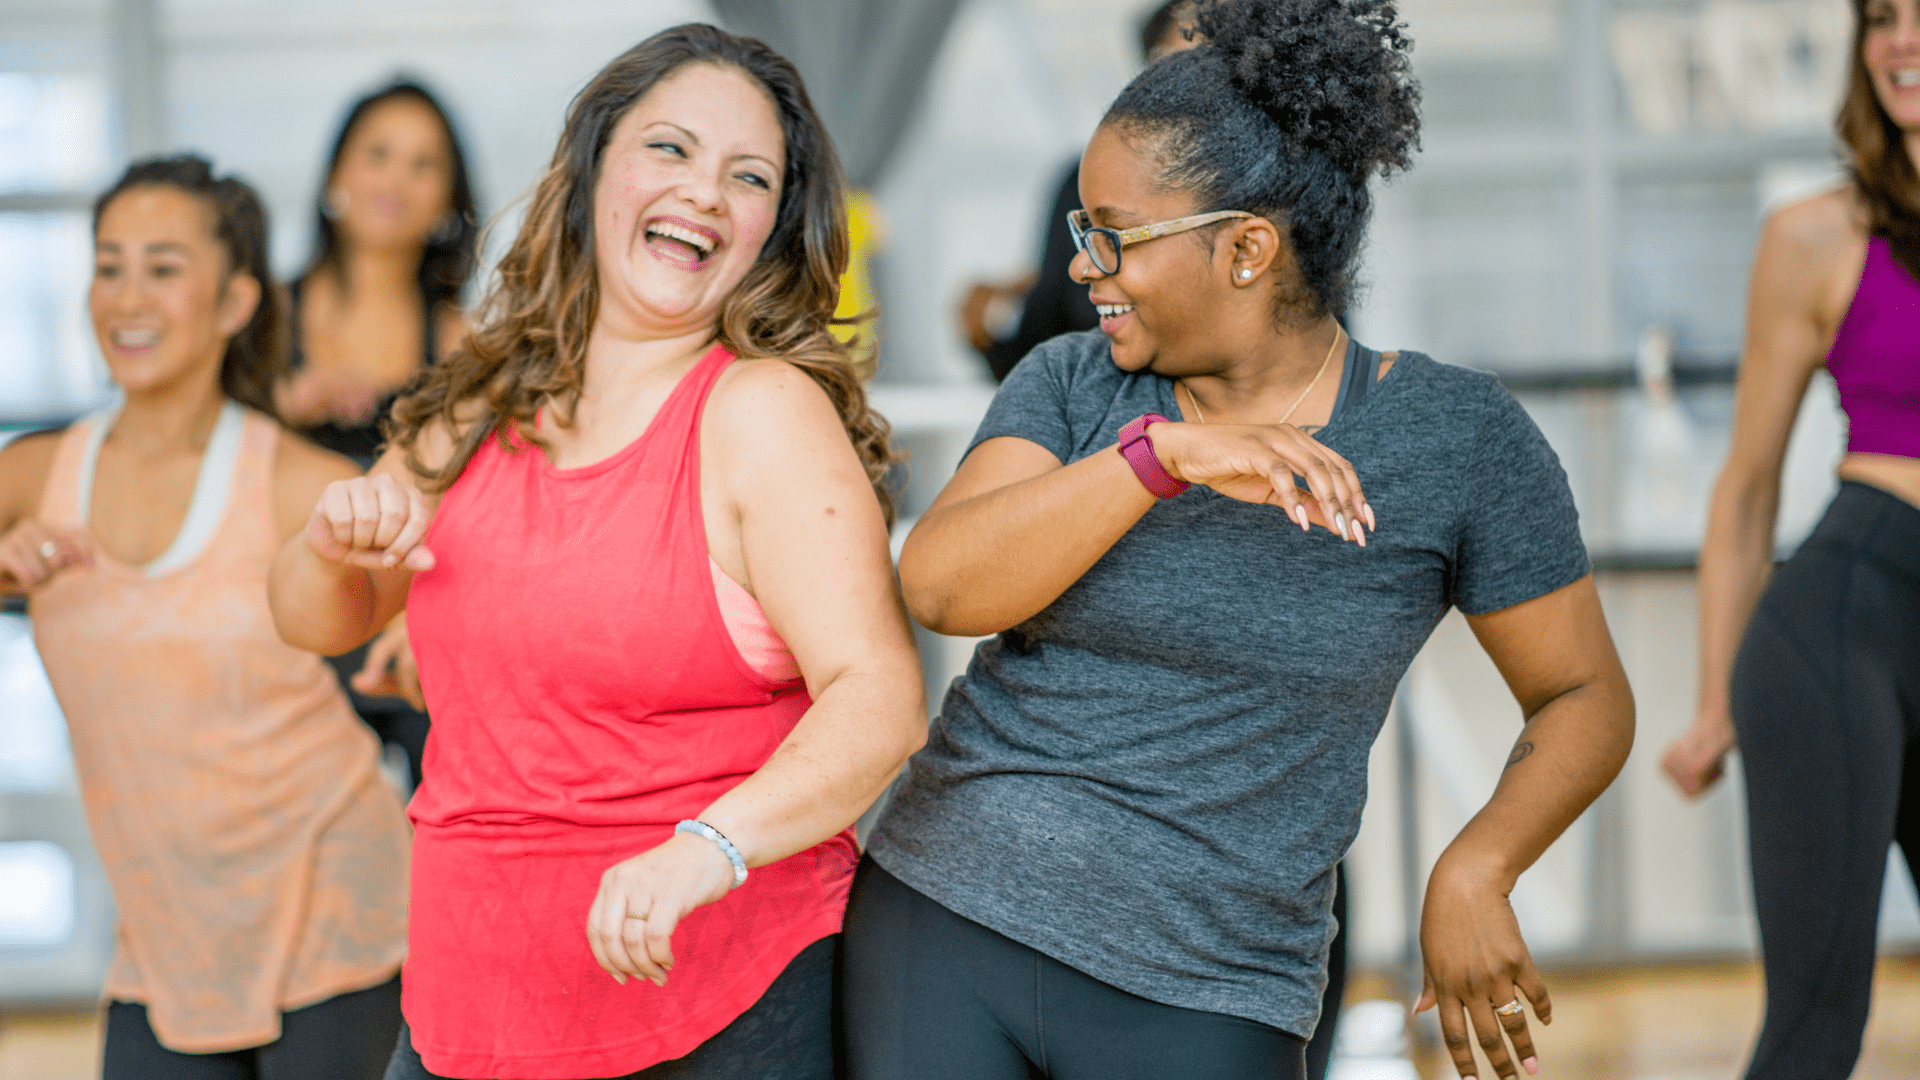 A group of women having a good time exercising.